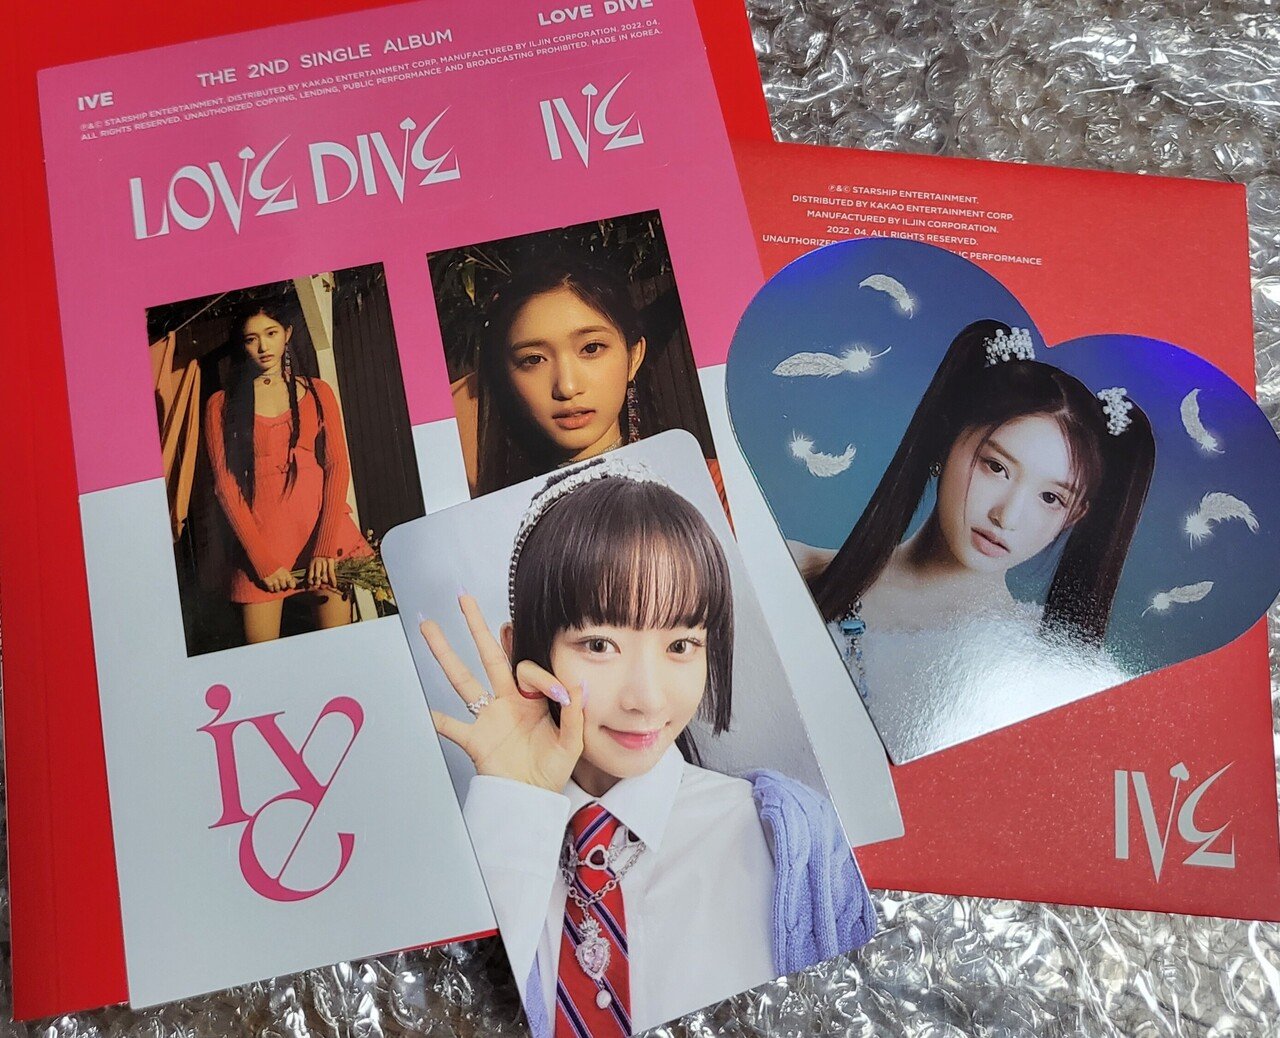 IVEの『LOVE DIVE』、届きました✨???? (Ktown4u)｜Water white lily*｜note